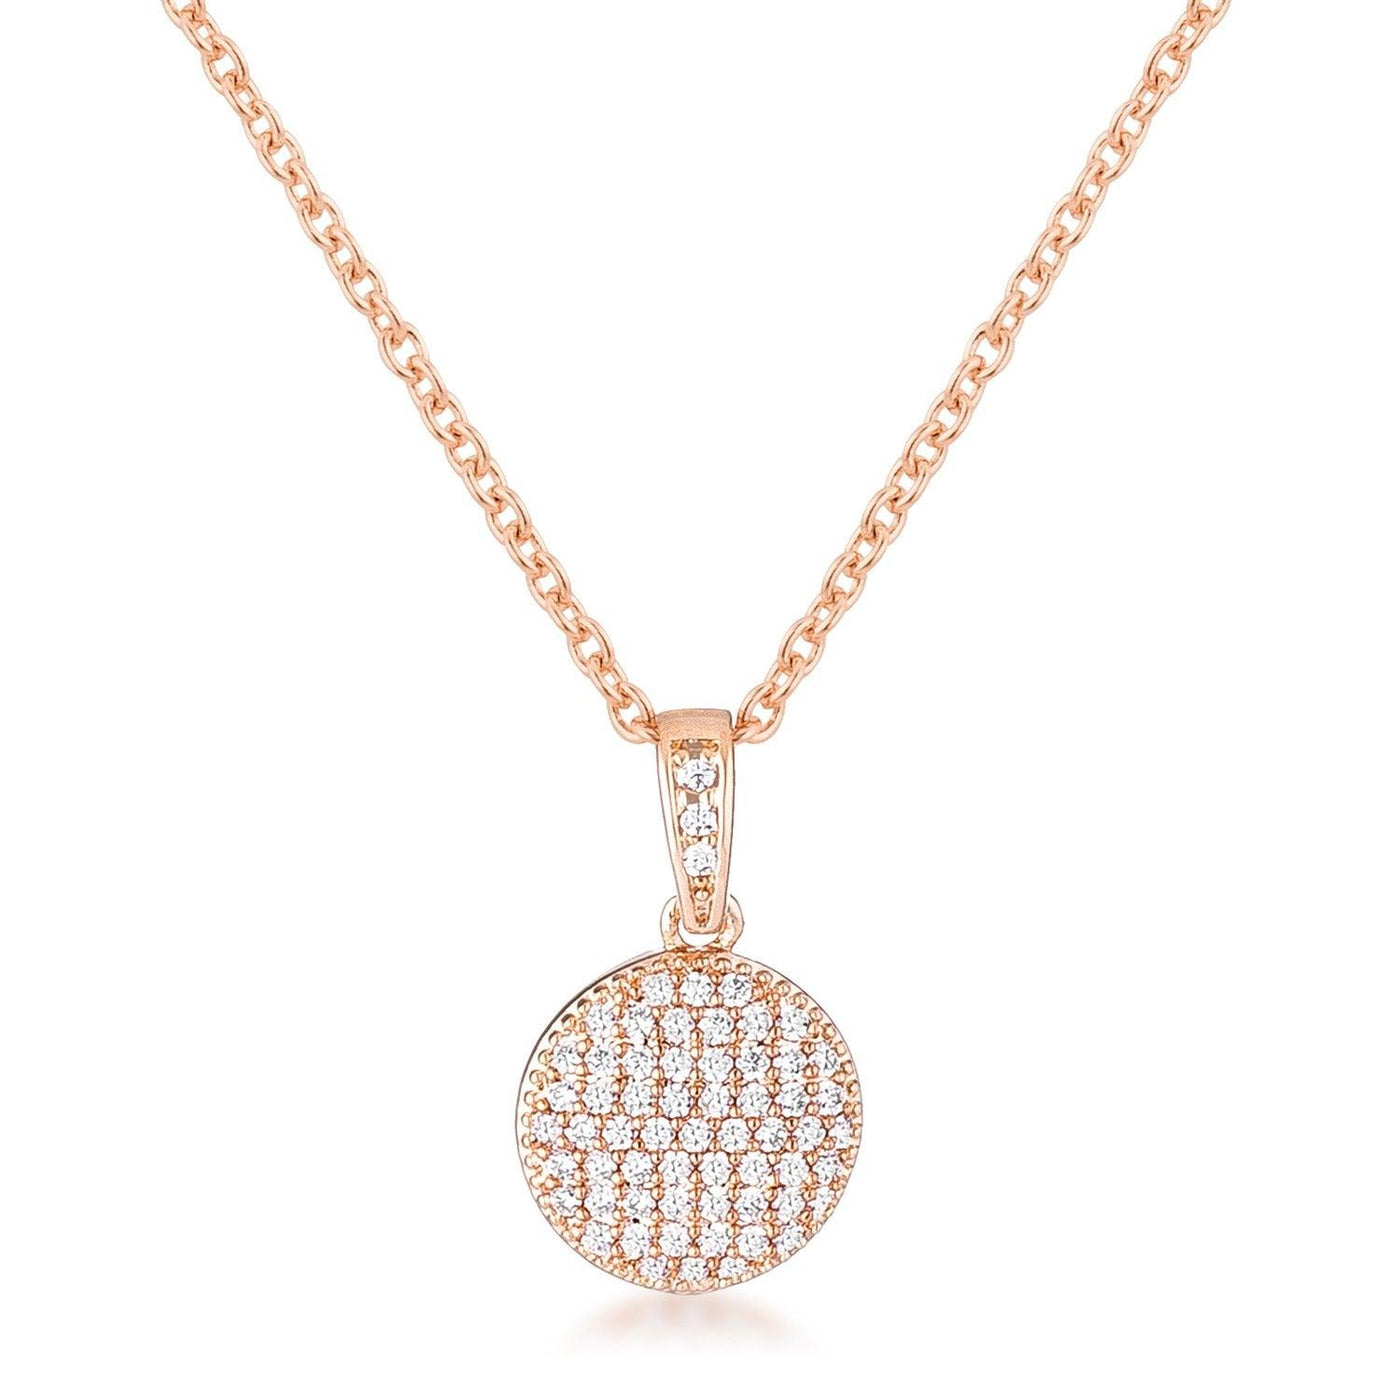 Rose Gold Plated Necklace with CZ Disk Pendant - AMIClubwear